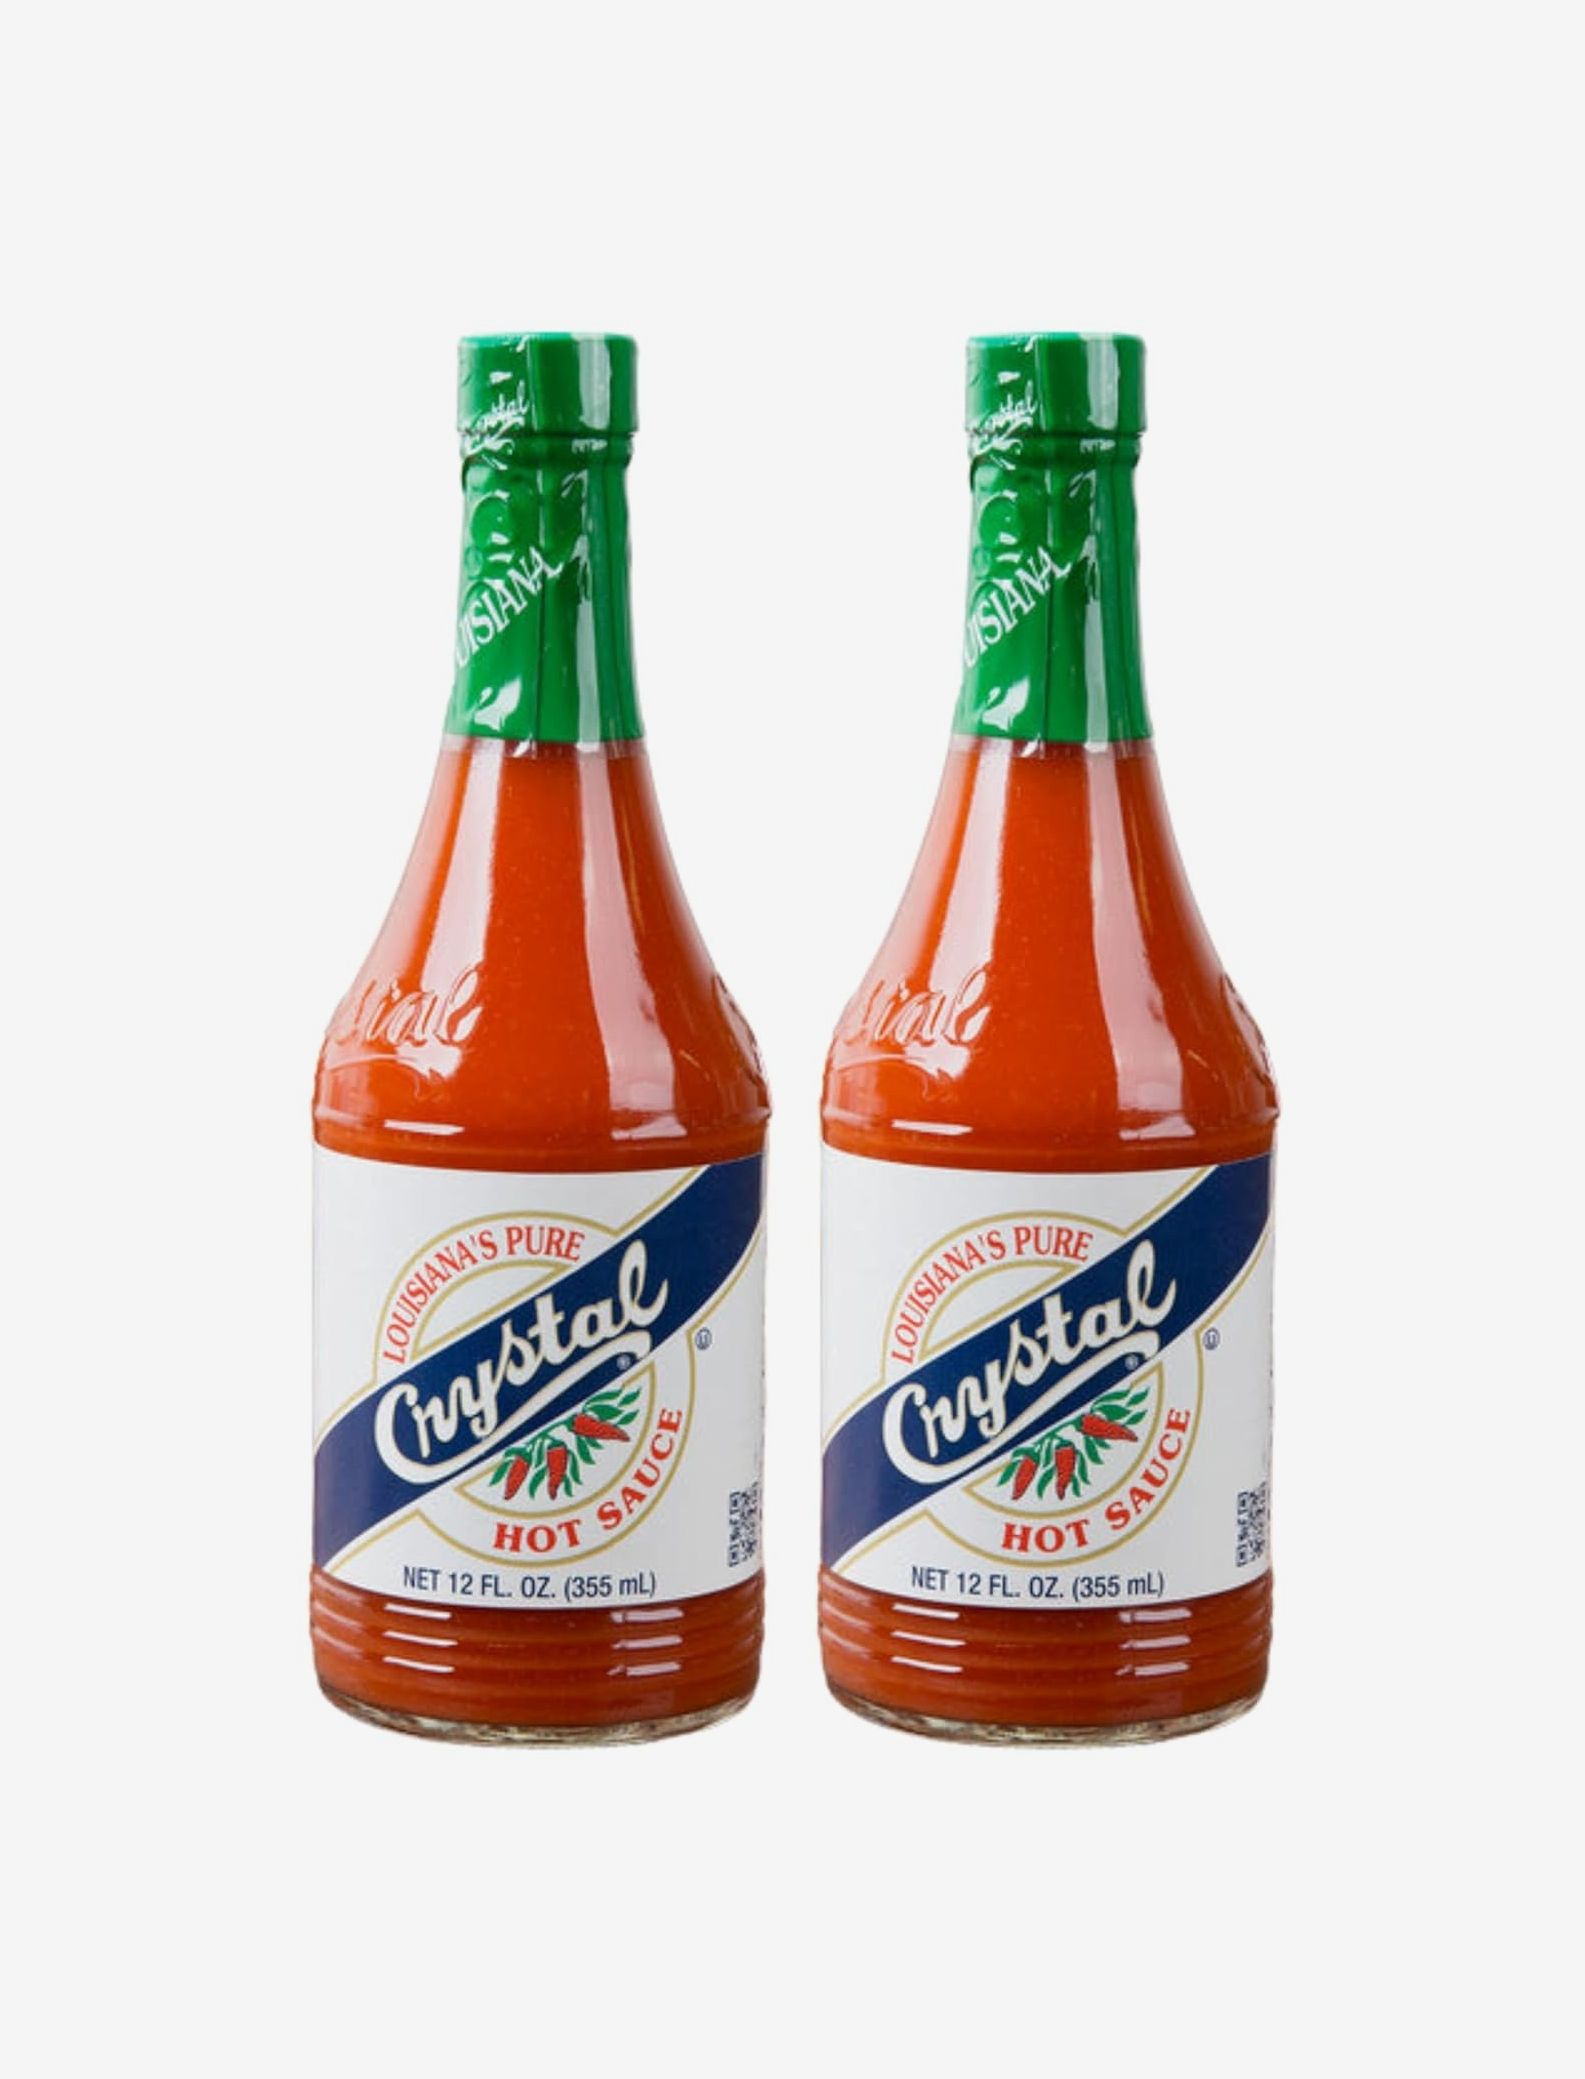 The 24 Best Hot Sauces According to Serious Eats Staffers